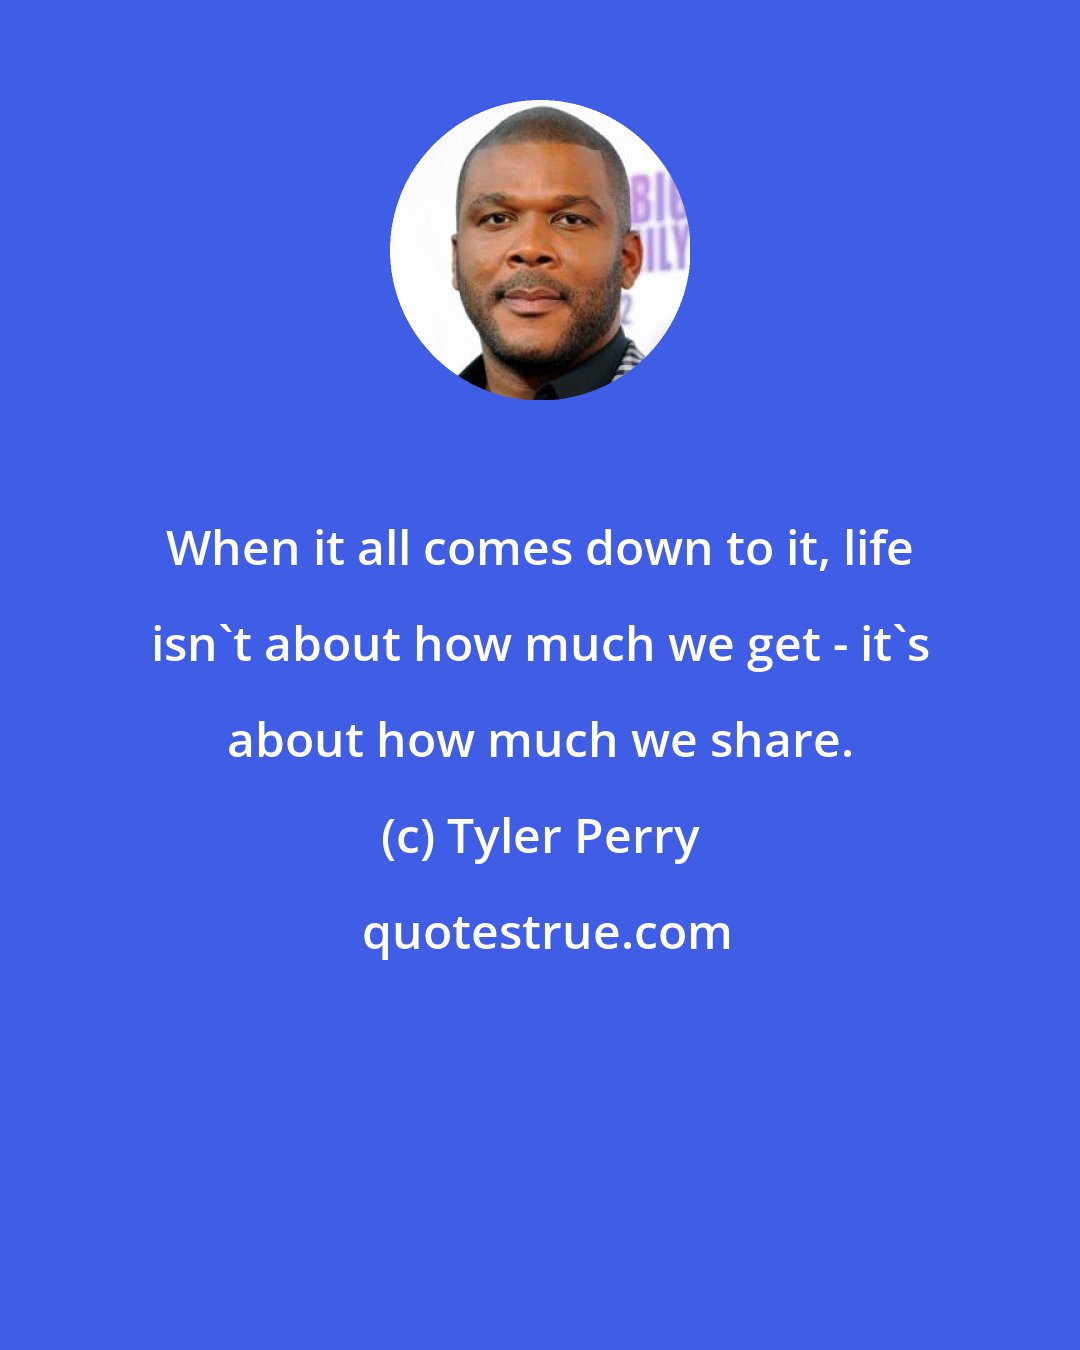 Tyler Perry: When it all comes down to it, life isn't about how much we get - it's about how much we share.